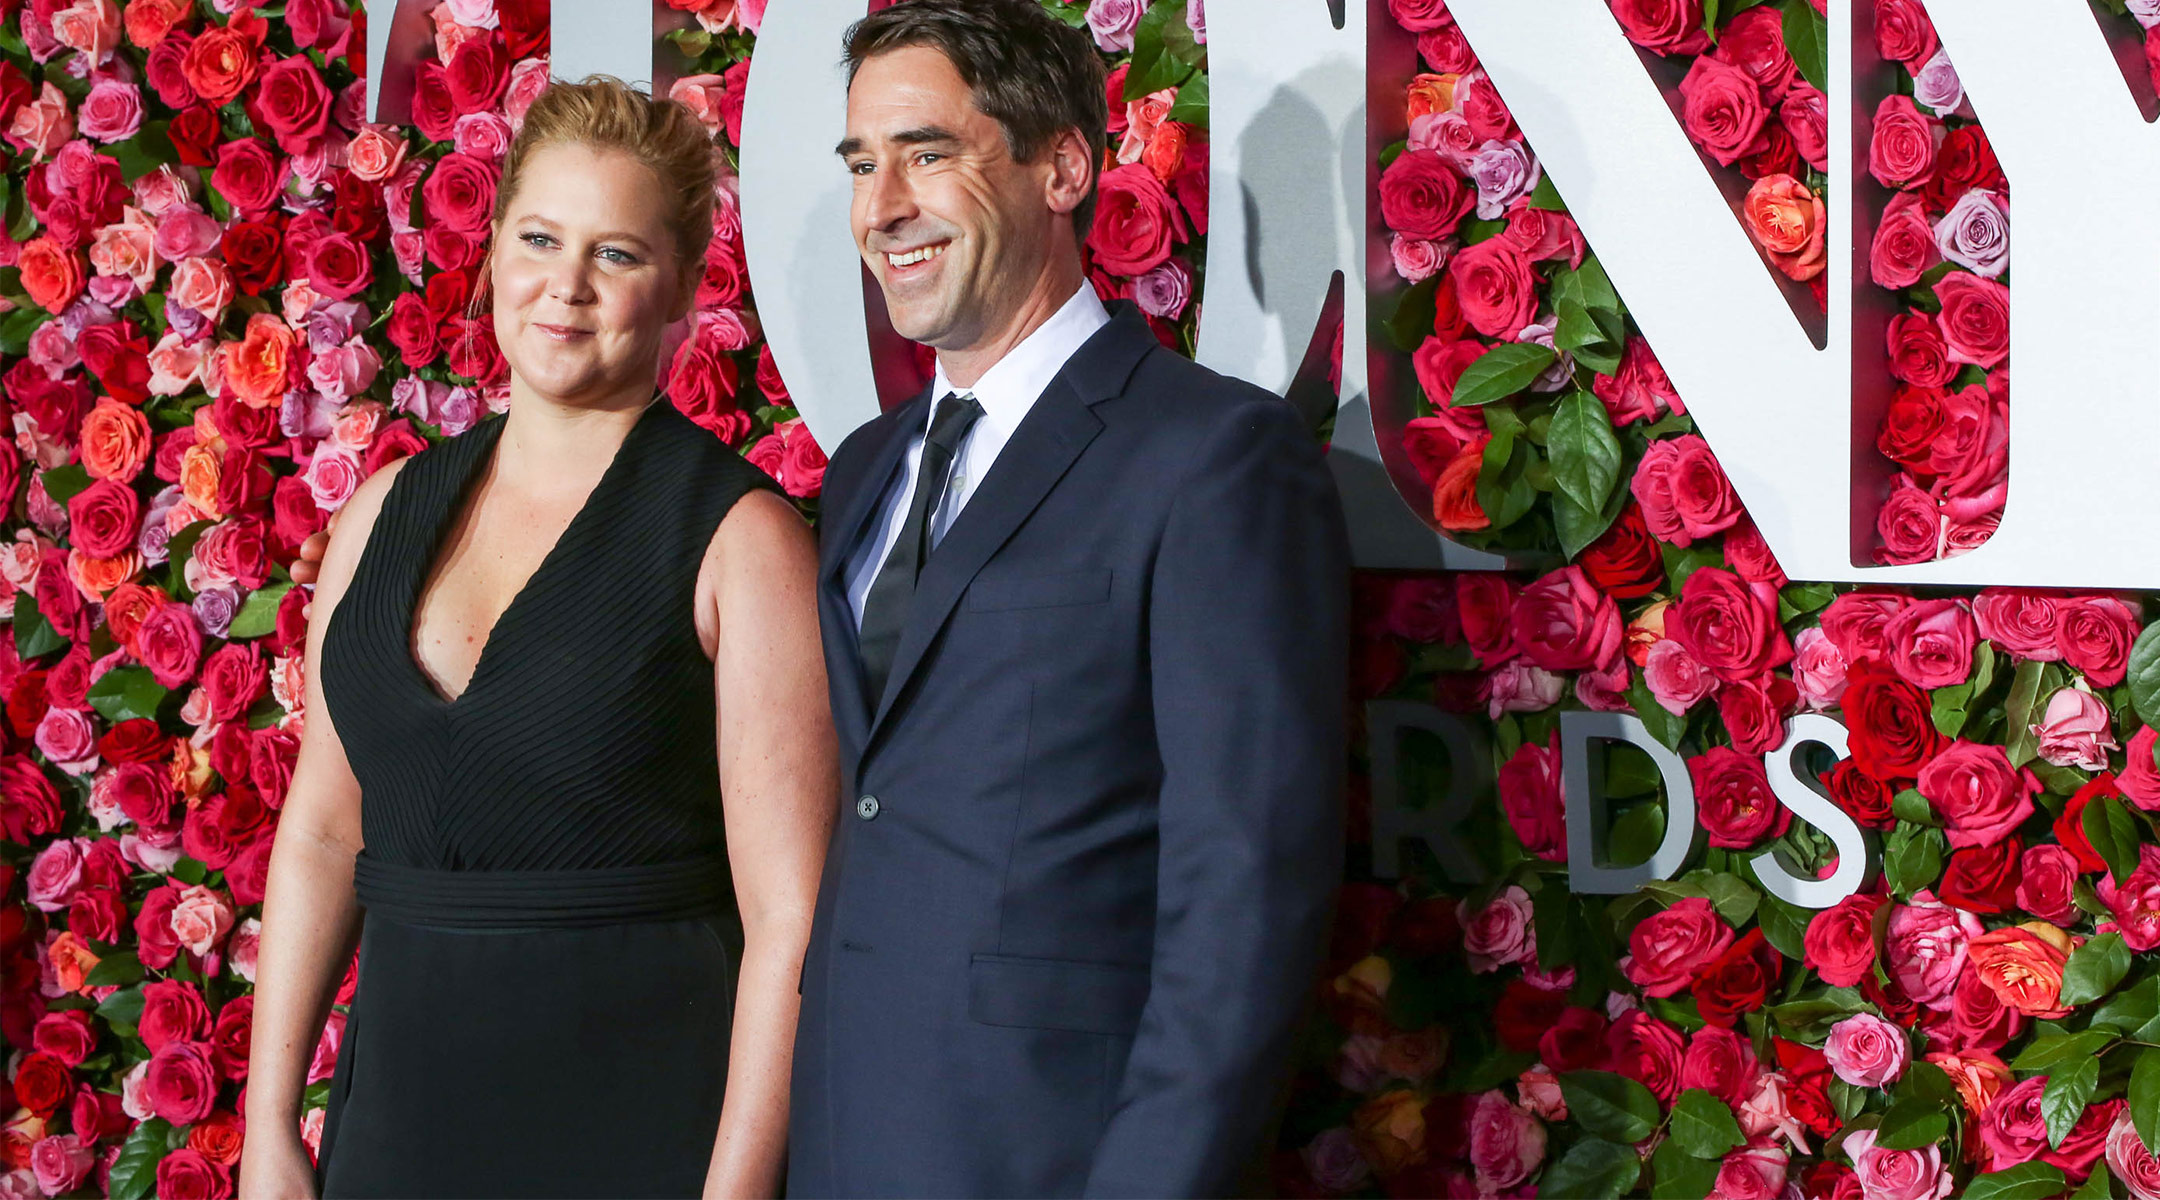 amy schumer announces she's pregnant, pictured with her husband chris fischer